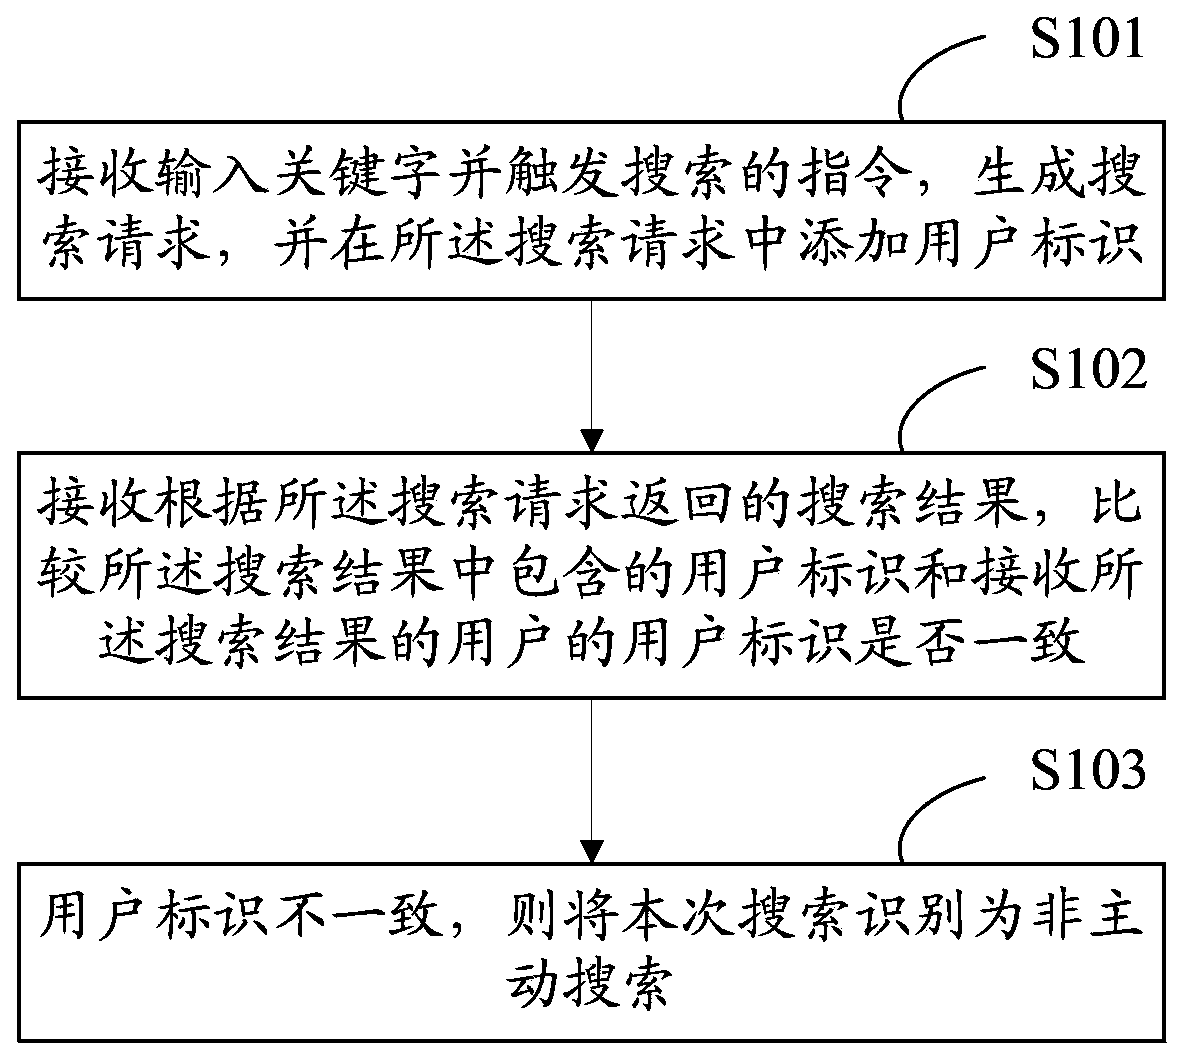 Network searching behavior recognition method and network searching behavior recognition system